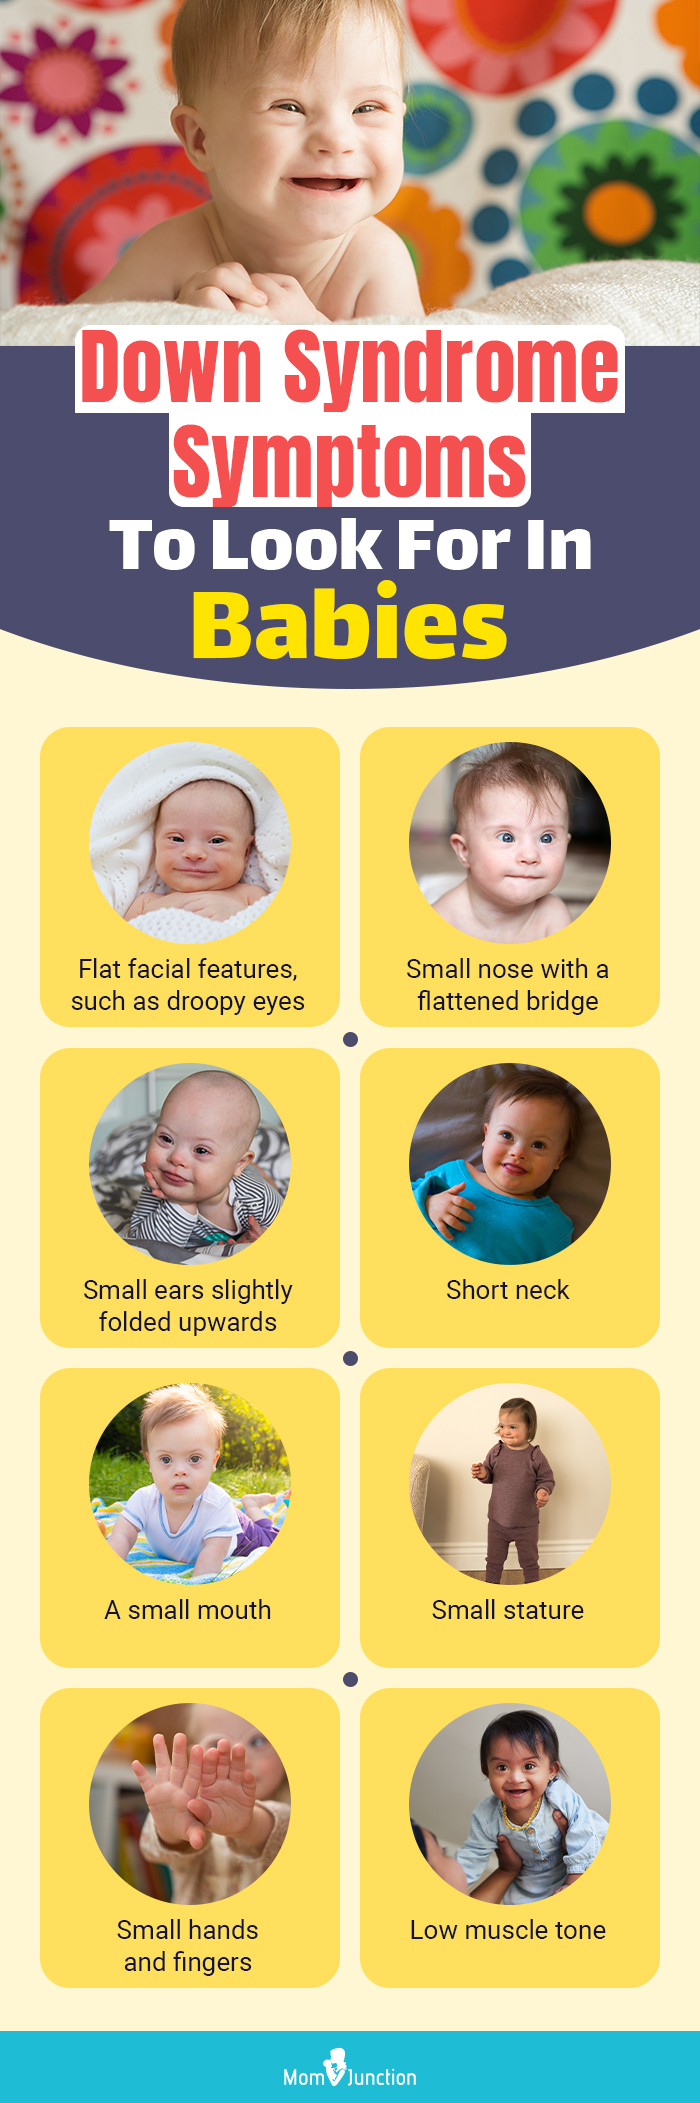 down syndrome symptoms to look for in babies (infographic)